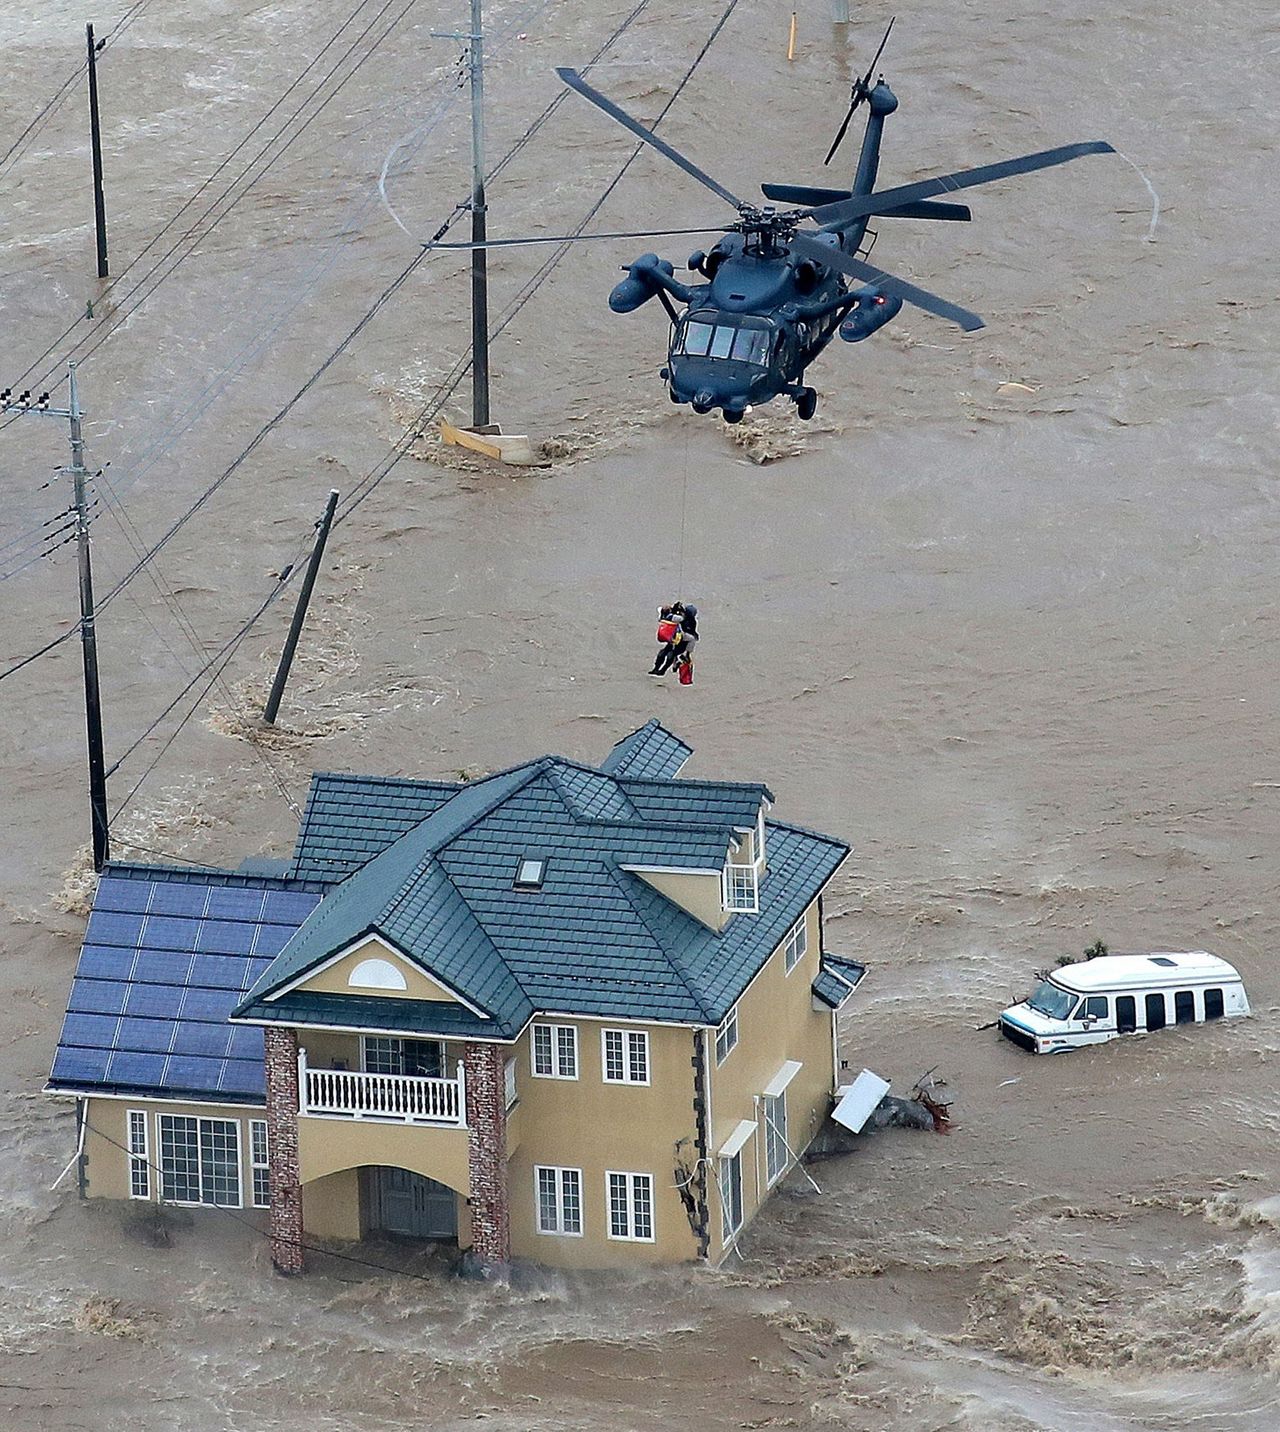 Local residents were rescued from their flooded home by a helicopter of the Ground Self Defence Force in Joso, Japan.